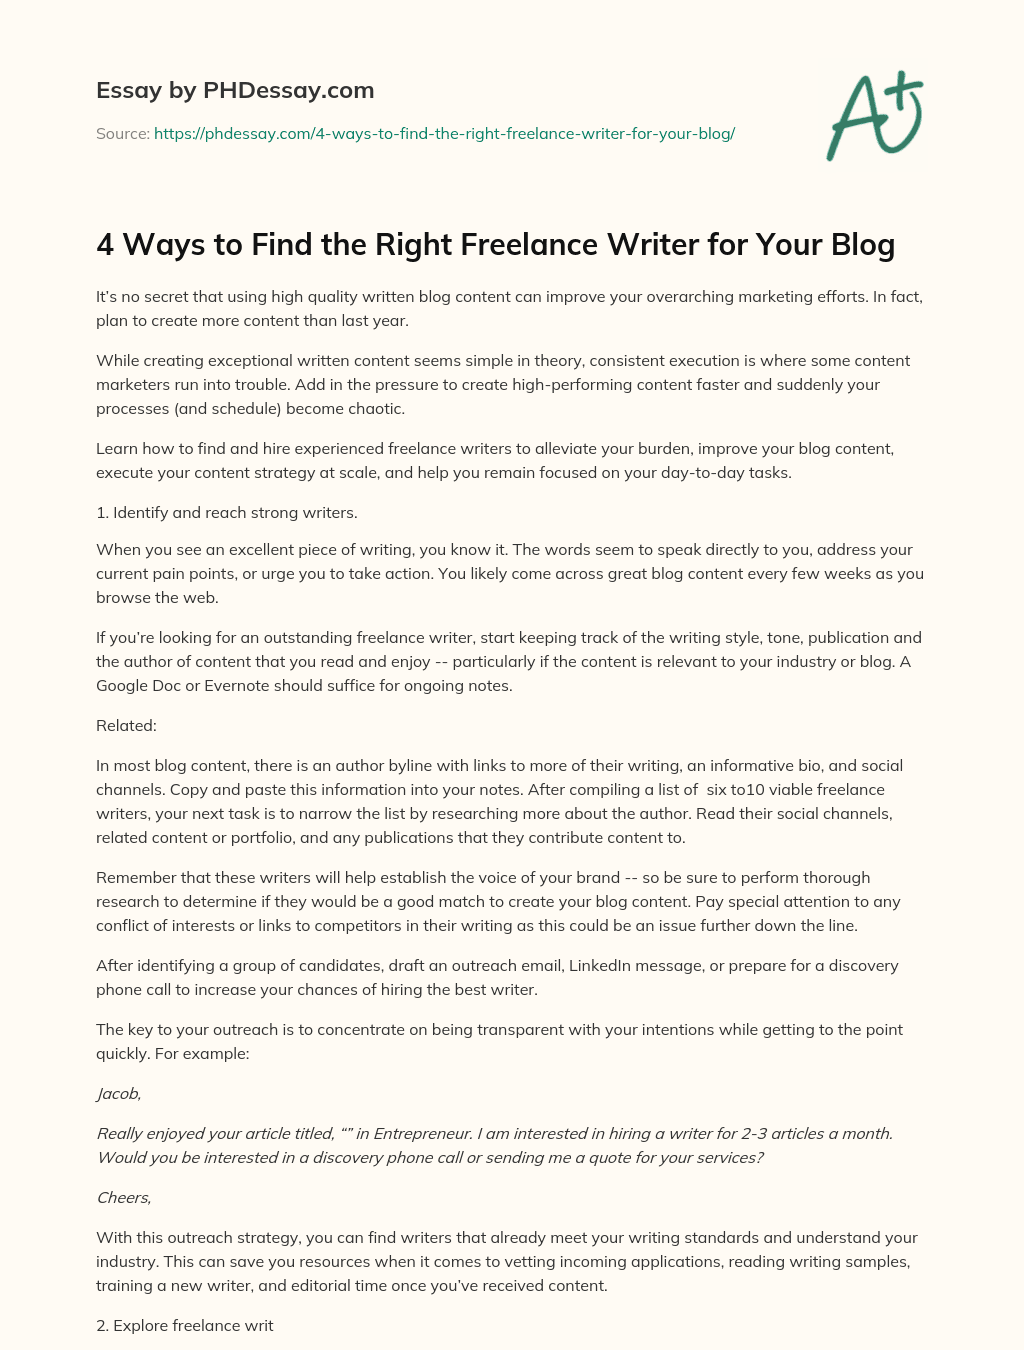 4 Ways to Find the Right Freelance Writer for Your Blog essay